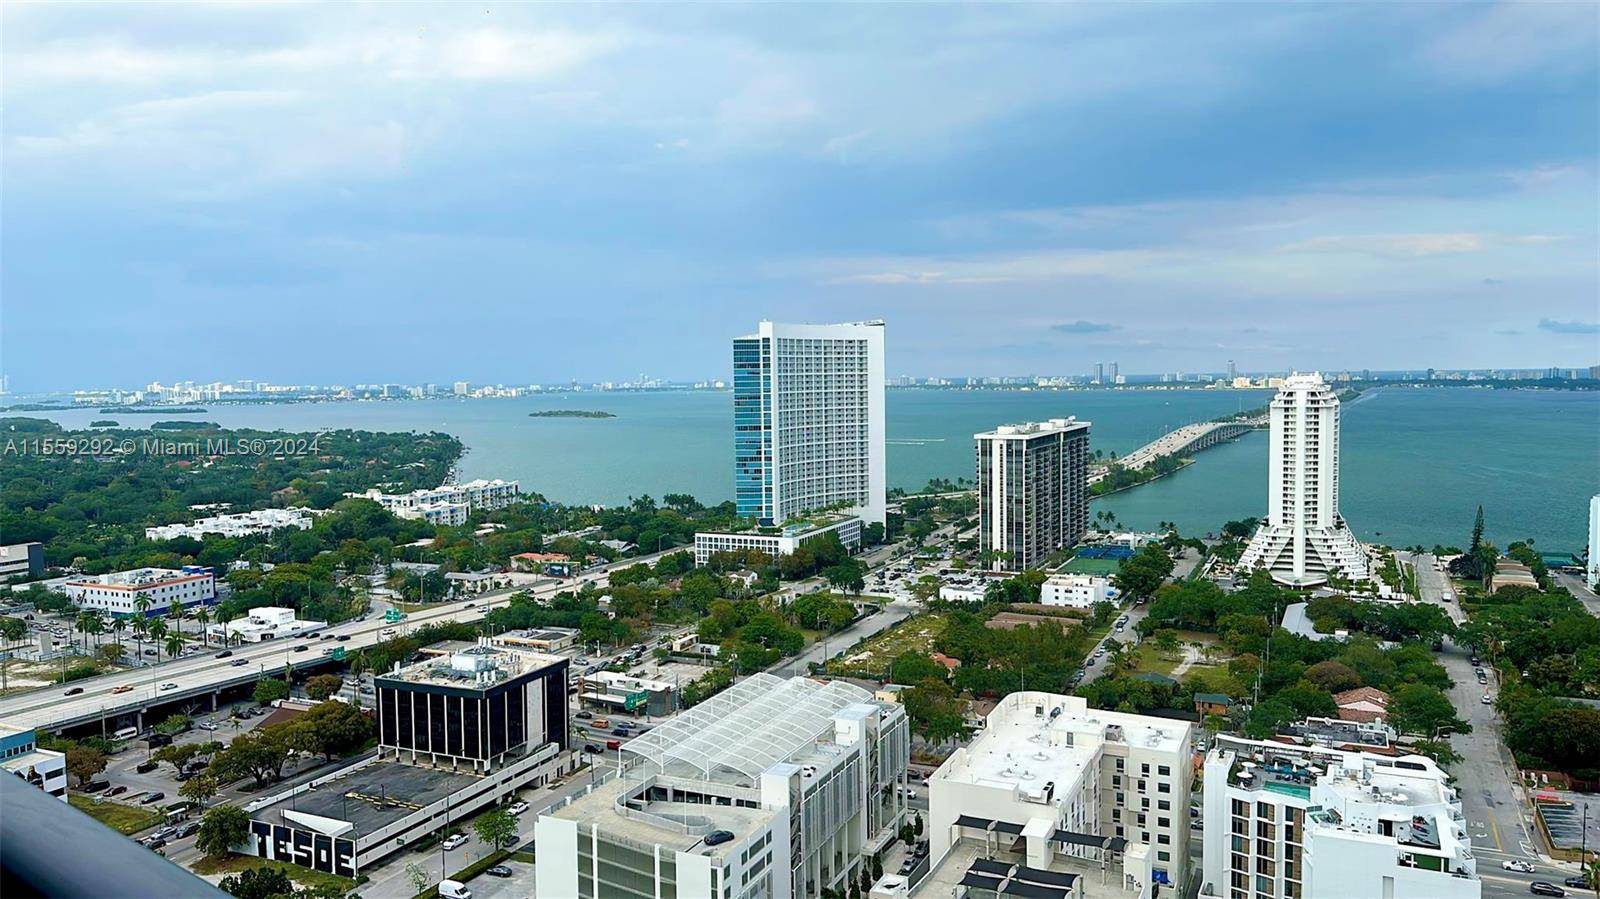 BREATHTAKING DIRECT BAY AND MIAMI SKYLINE VIEWS FROM THIS AMAZING FULLY FURNISHED 2 BEDROOM CONVERTED DEN, 2 FULL BATHS WITH THROUGHOUT CERAMIC WOOD LIKE FLOORS, KITCHEN W ITALIANCABINETRY, SS APPLIANCES ...